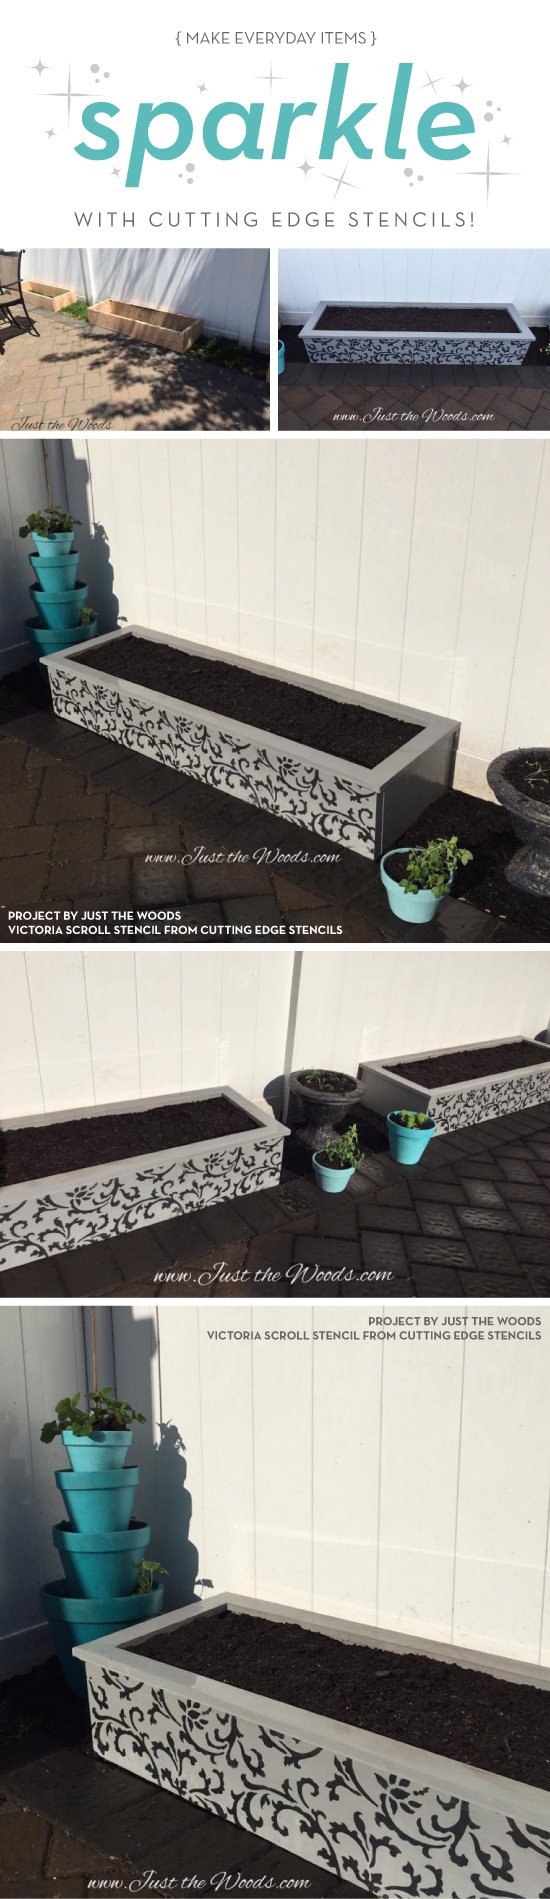 Cutting Edge Stencils shares how to make stenciled garden planters using the Victoria Scroll Stencil. http://www.cuttingedgestencils.com/victoria-scroll-wall-pattern-stencil-diy-wall-decor.html